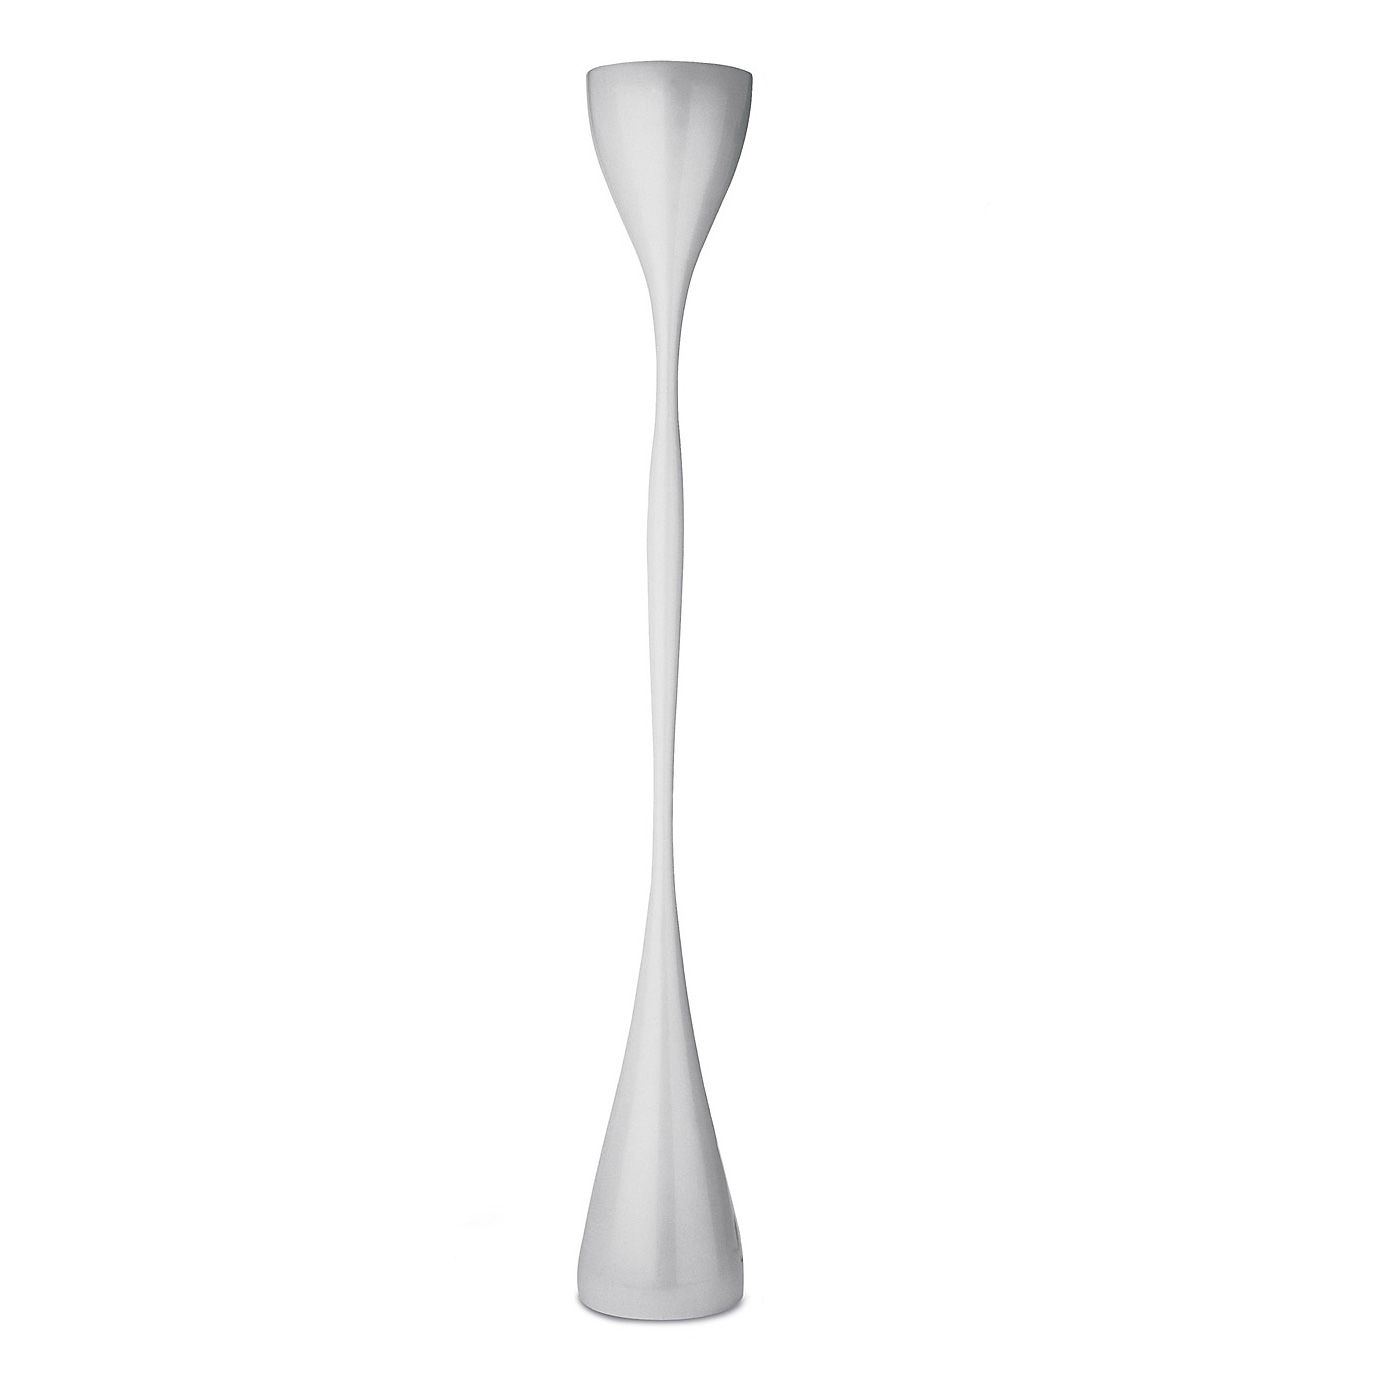 Outdoor lamp Jazz by Vibia